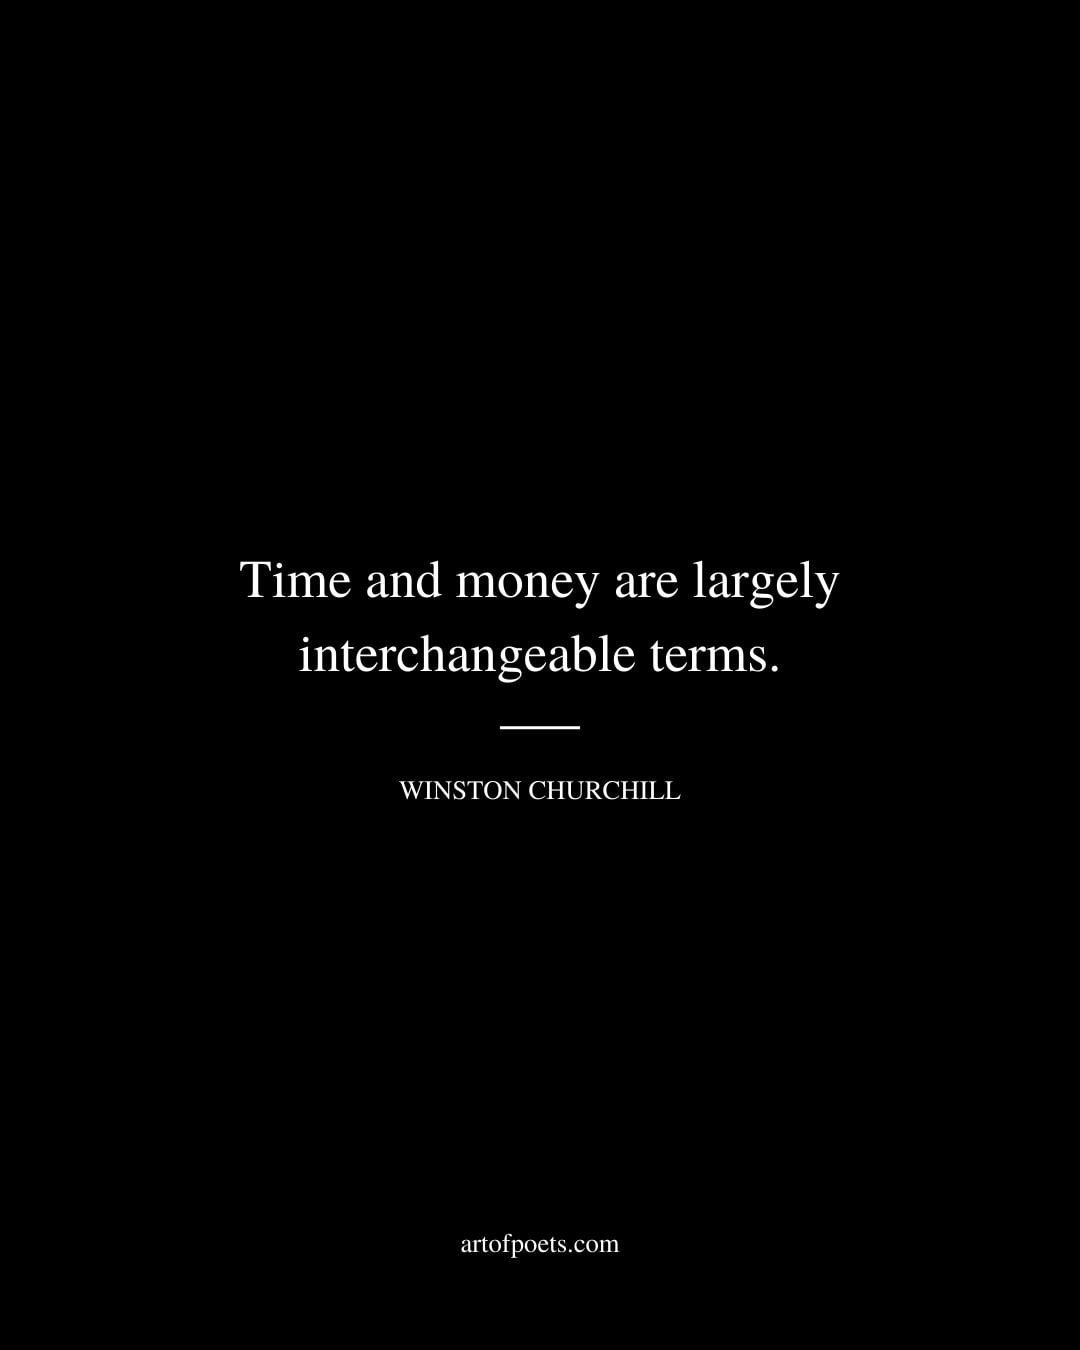 Time and money are largely interchangeable terms